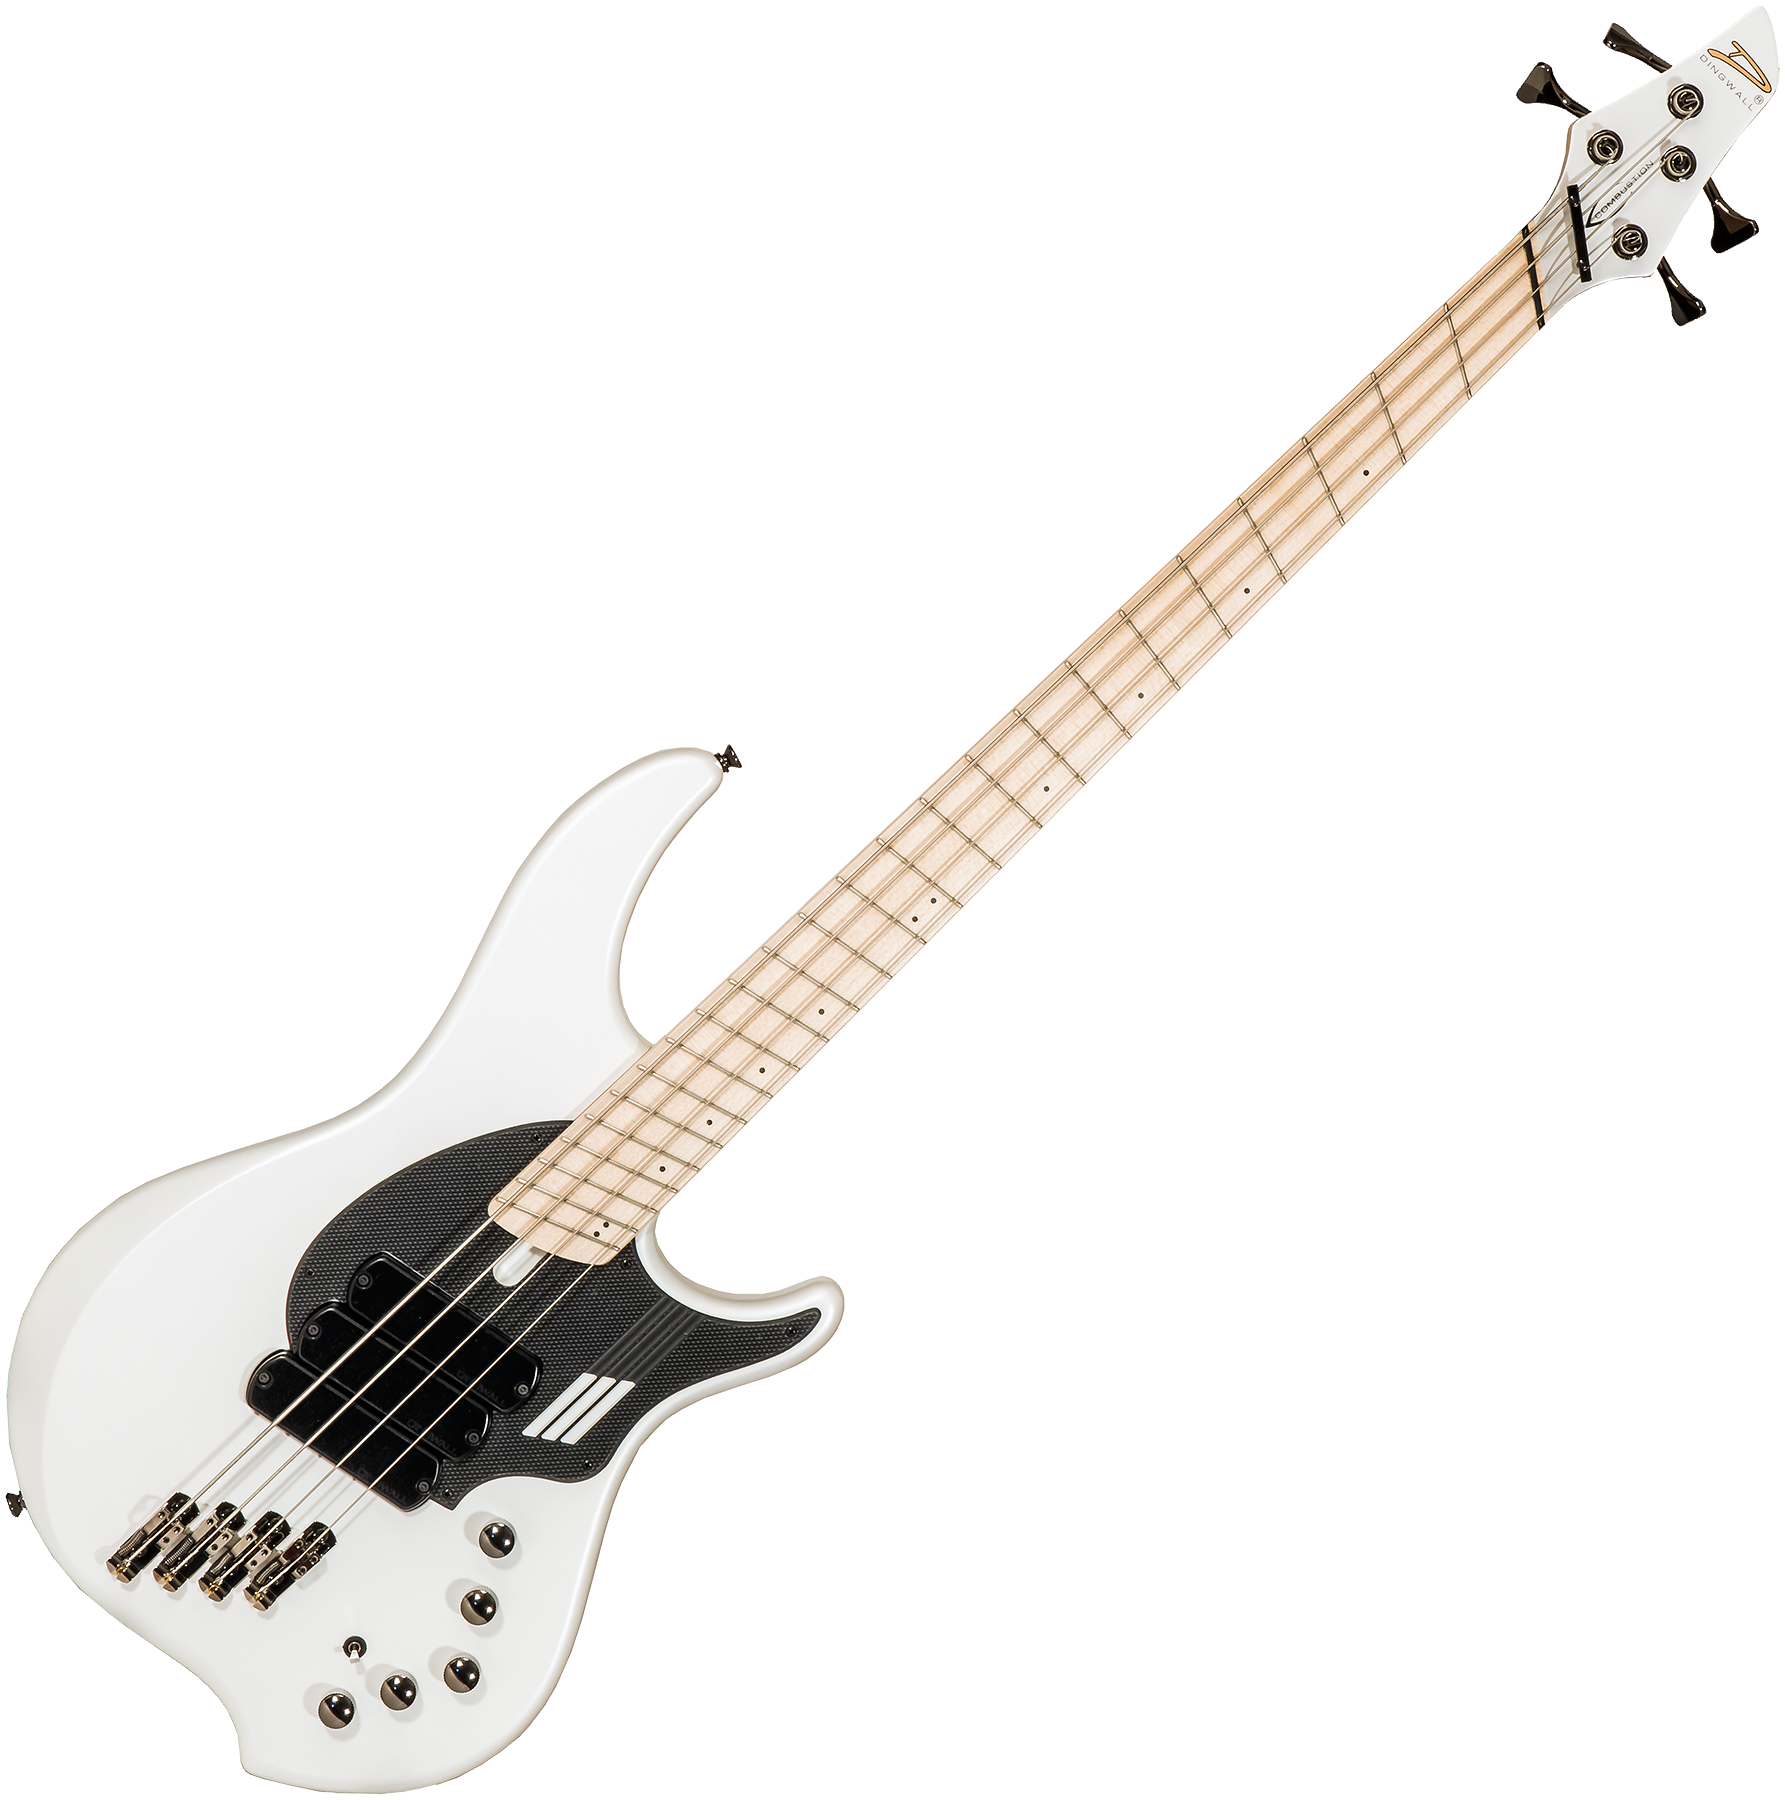 Dingwall Adam Nolly Getgood Ng3 4c 3pu Signature Active Mn - Ducati Pearl White - Basse Électrique Solid Body - Variation 1